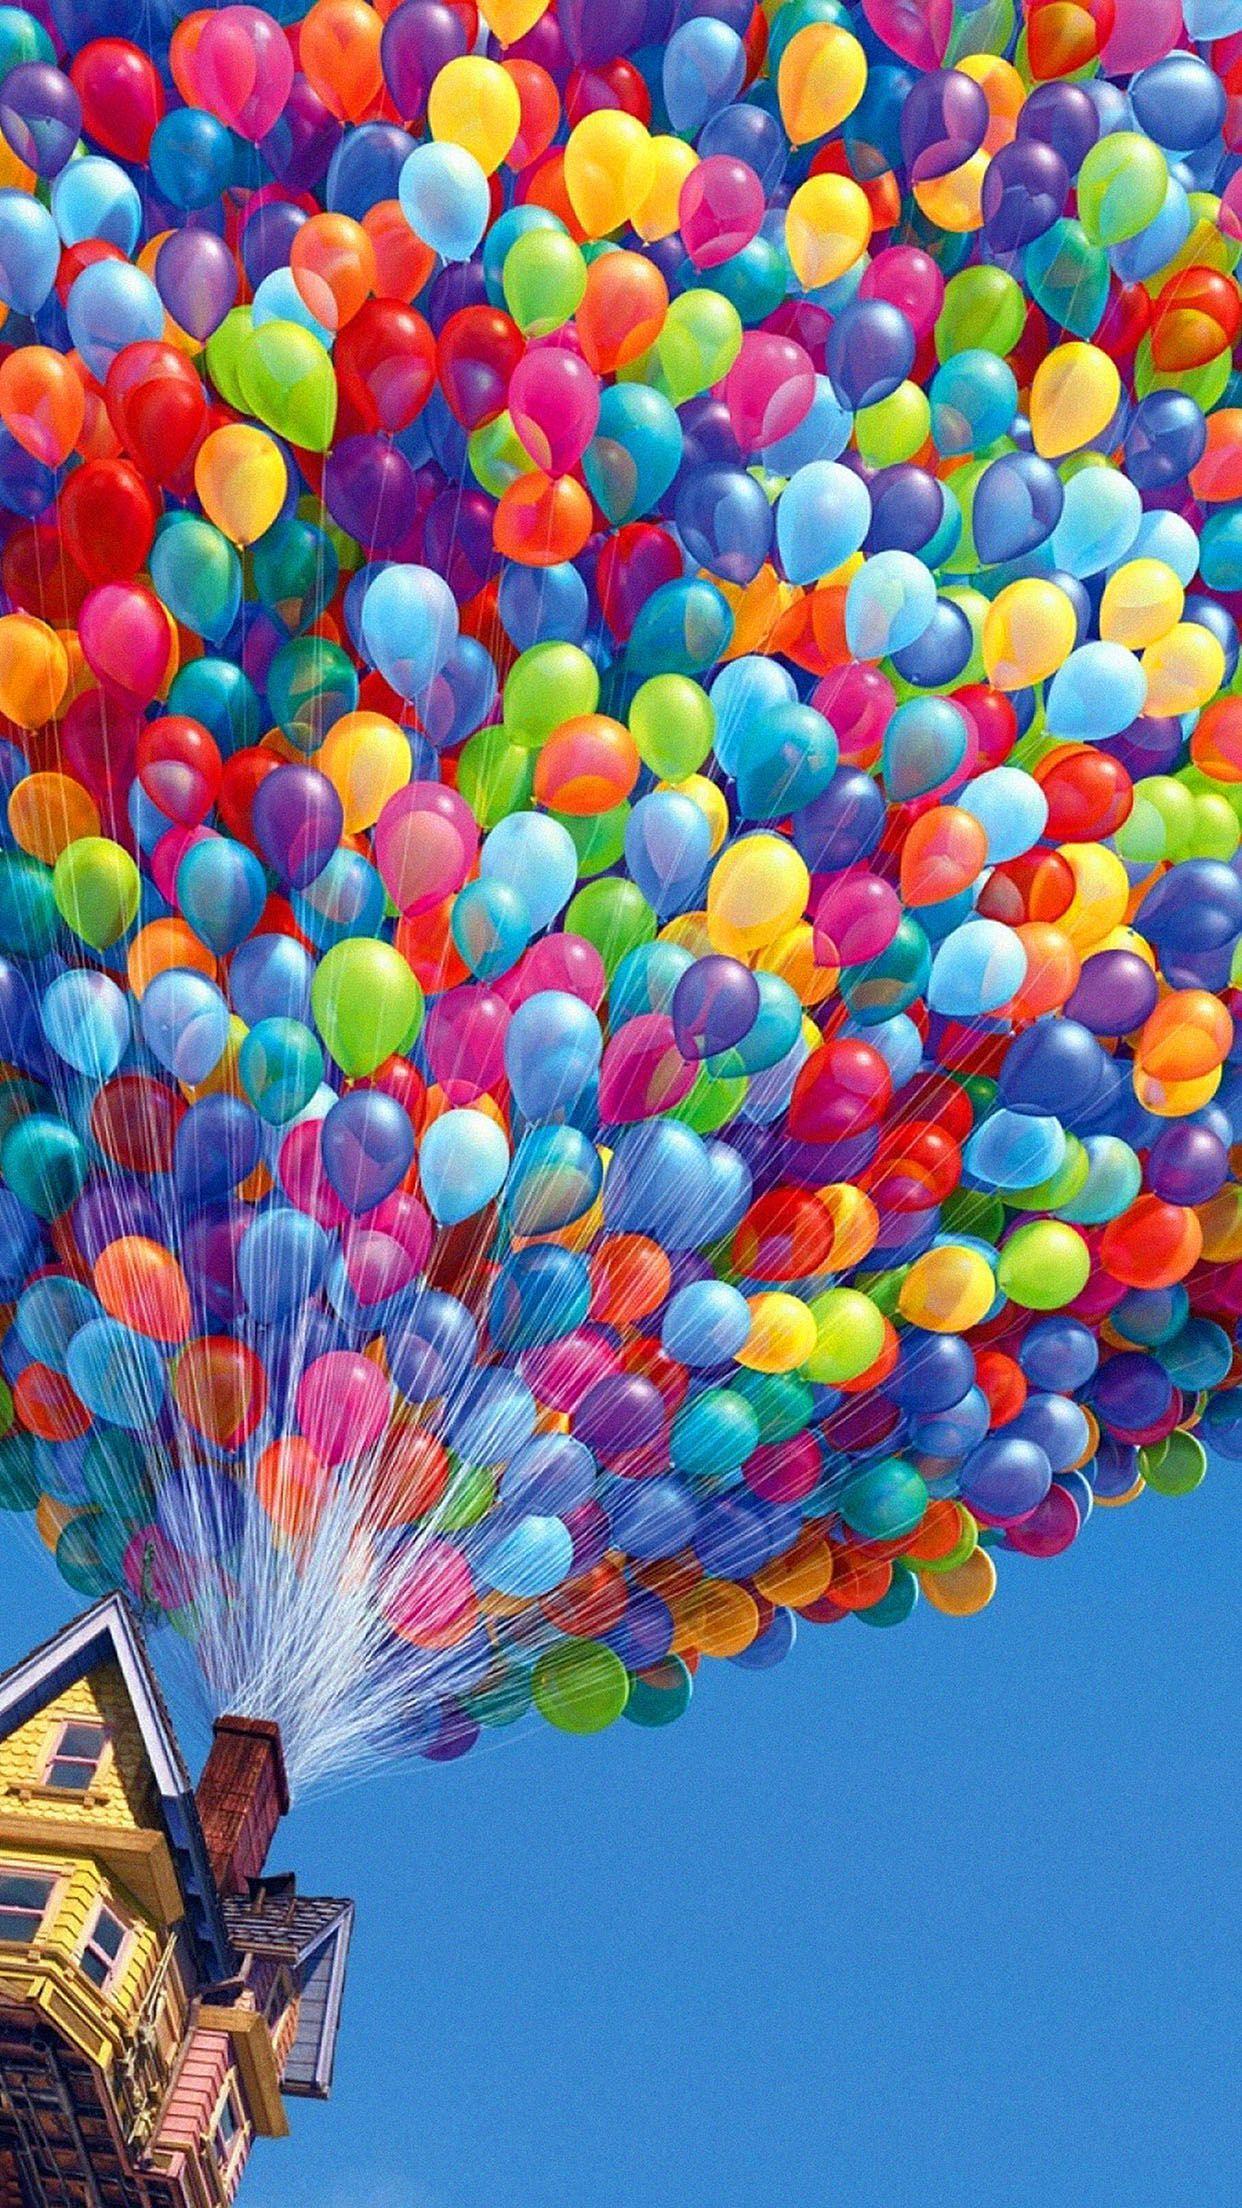 Colorful Balloons House Up Movie Android Wallpaper. Art in 2019